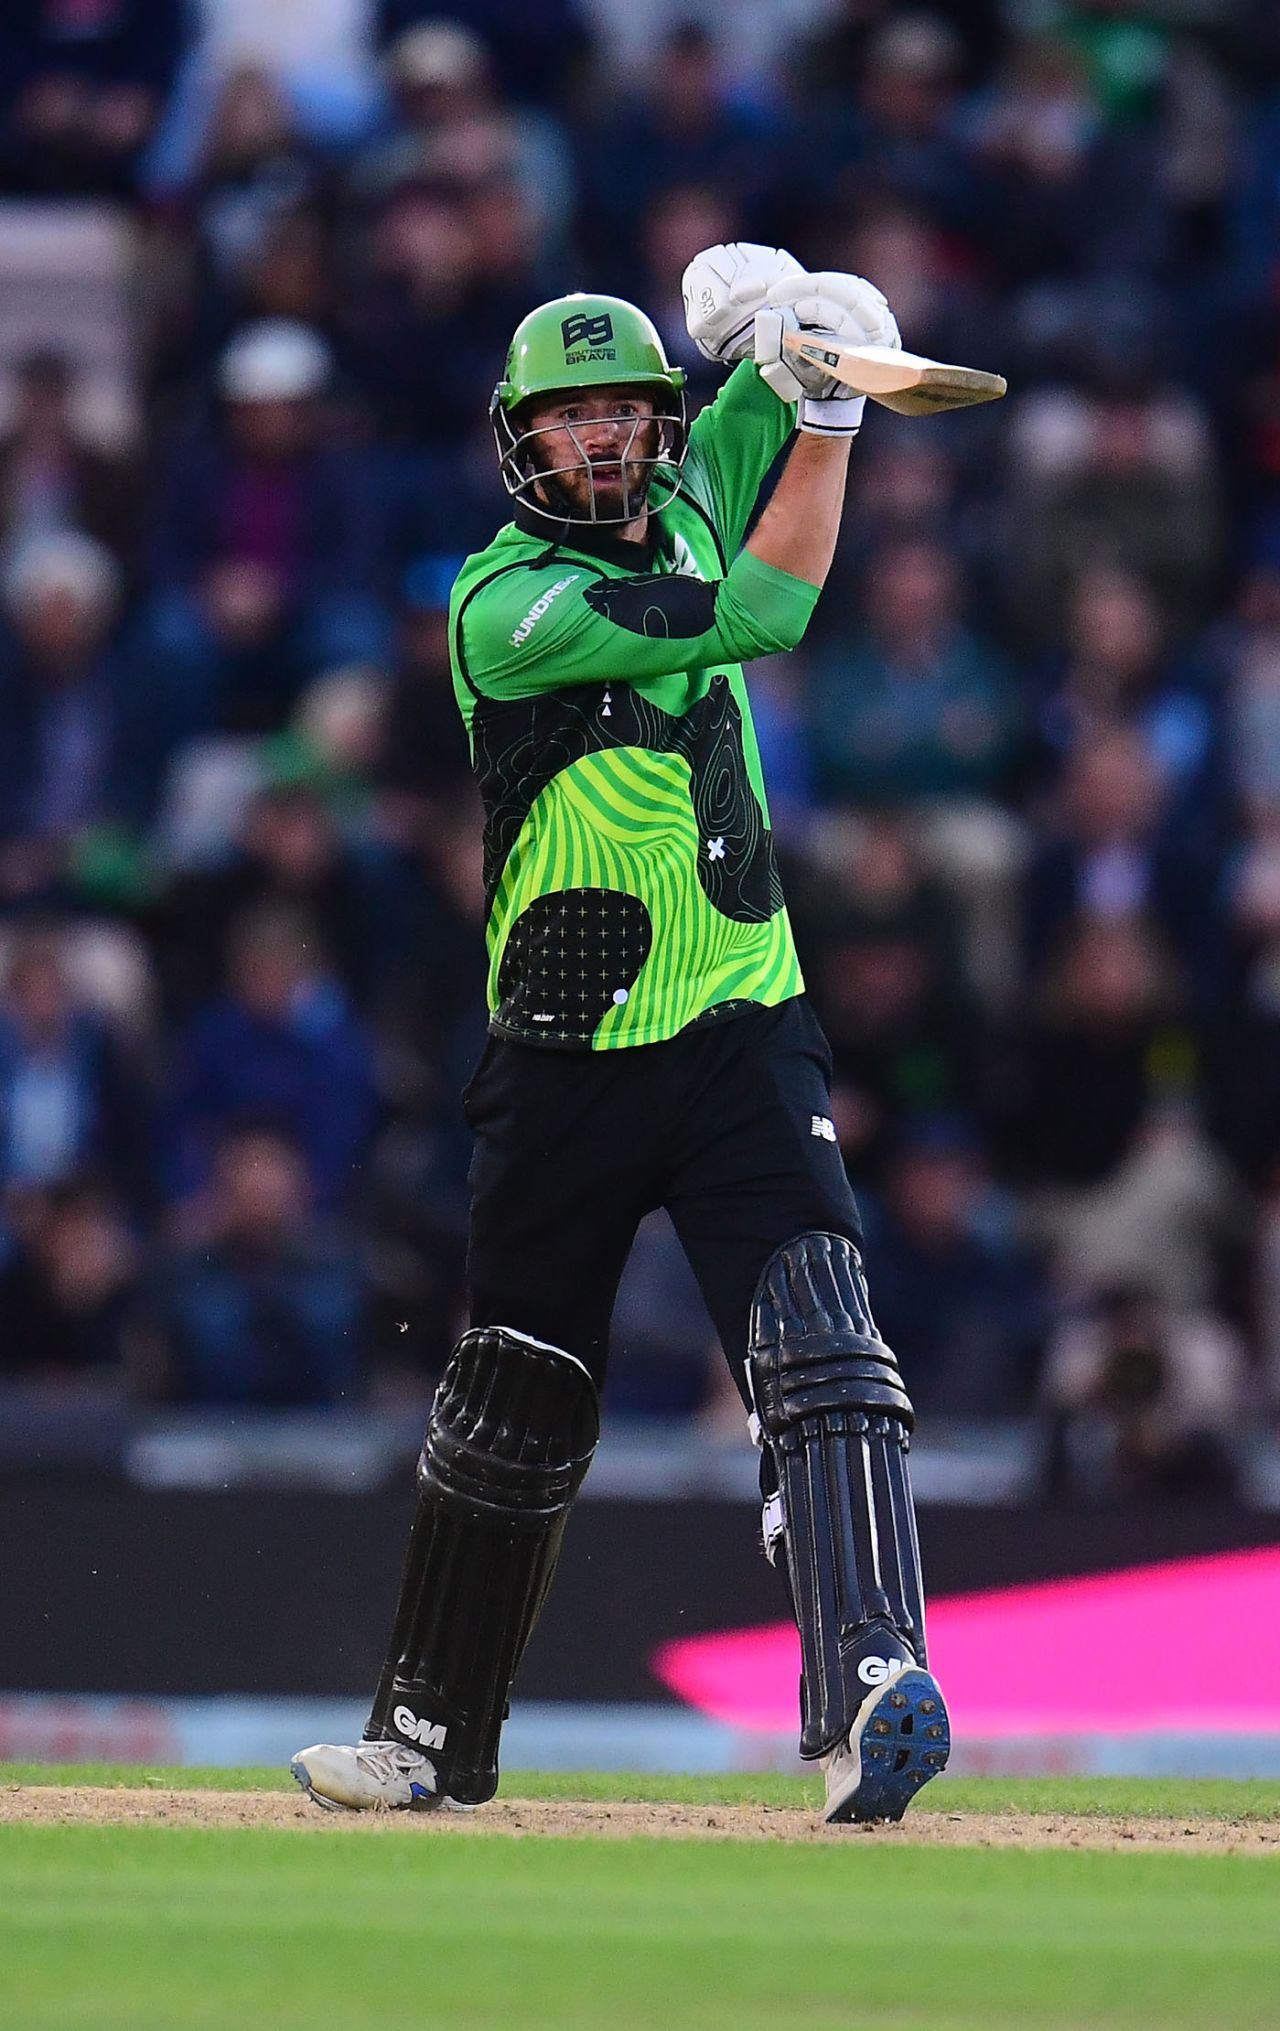 James Vince's fifty set the tone in the run chase, Birmingham Phoenix vs Southern Brave, The Men's Hundred, Southampton, July 30, 2021